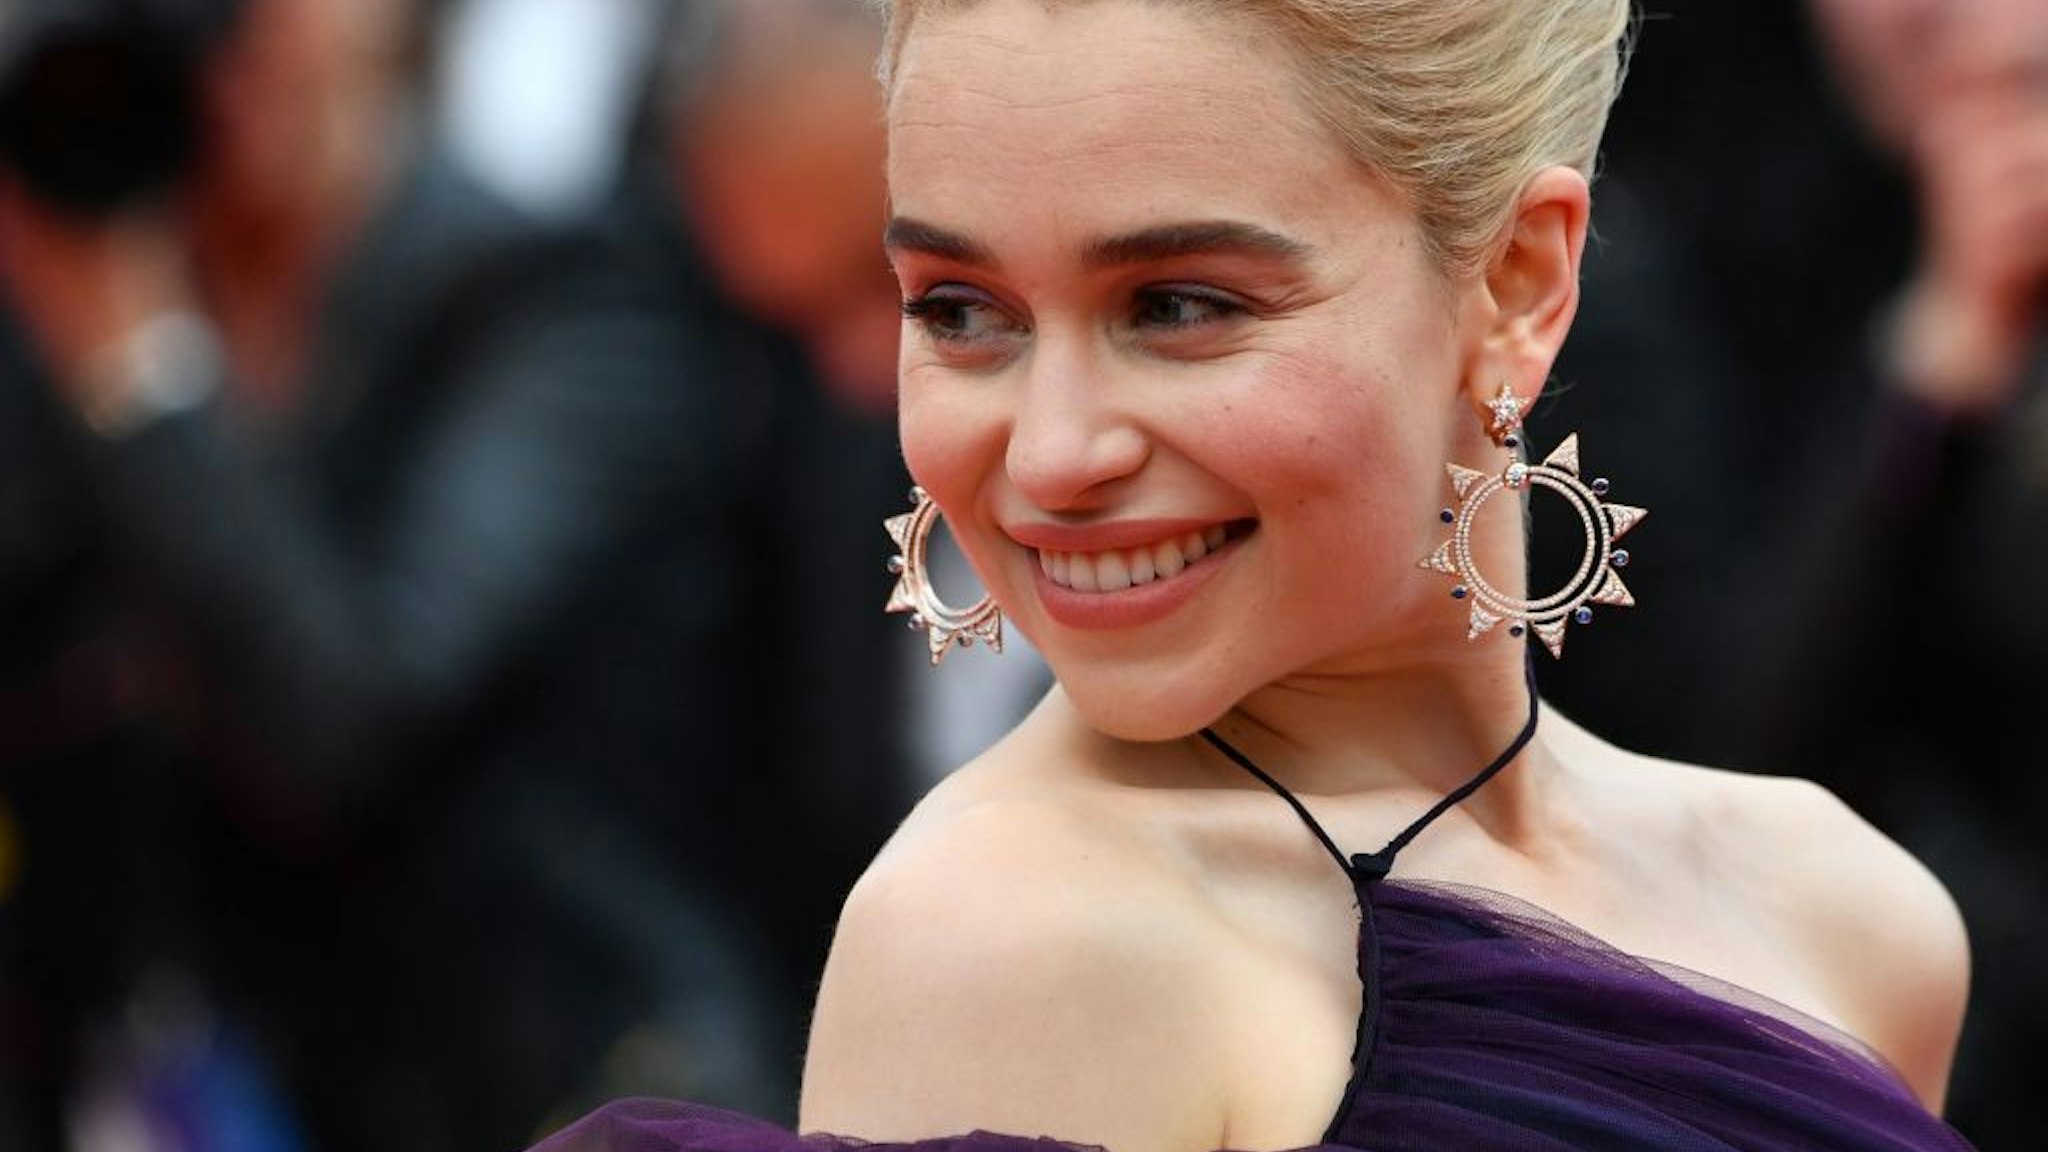 British actress Emilia Clarke poses as she arrives on May 15, 2018 for the screening of the film "Solo : A Star Wars Story" at the 71st edition of the Cannes Film Festival in Cannes, southern France. (Photo by Alberto PIZZOLI / AFP) (Photo credit should read ALBERTO PIZZOLI/AFP via Getty Images)